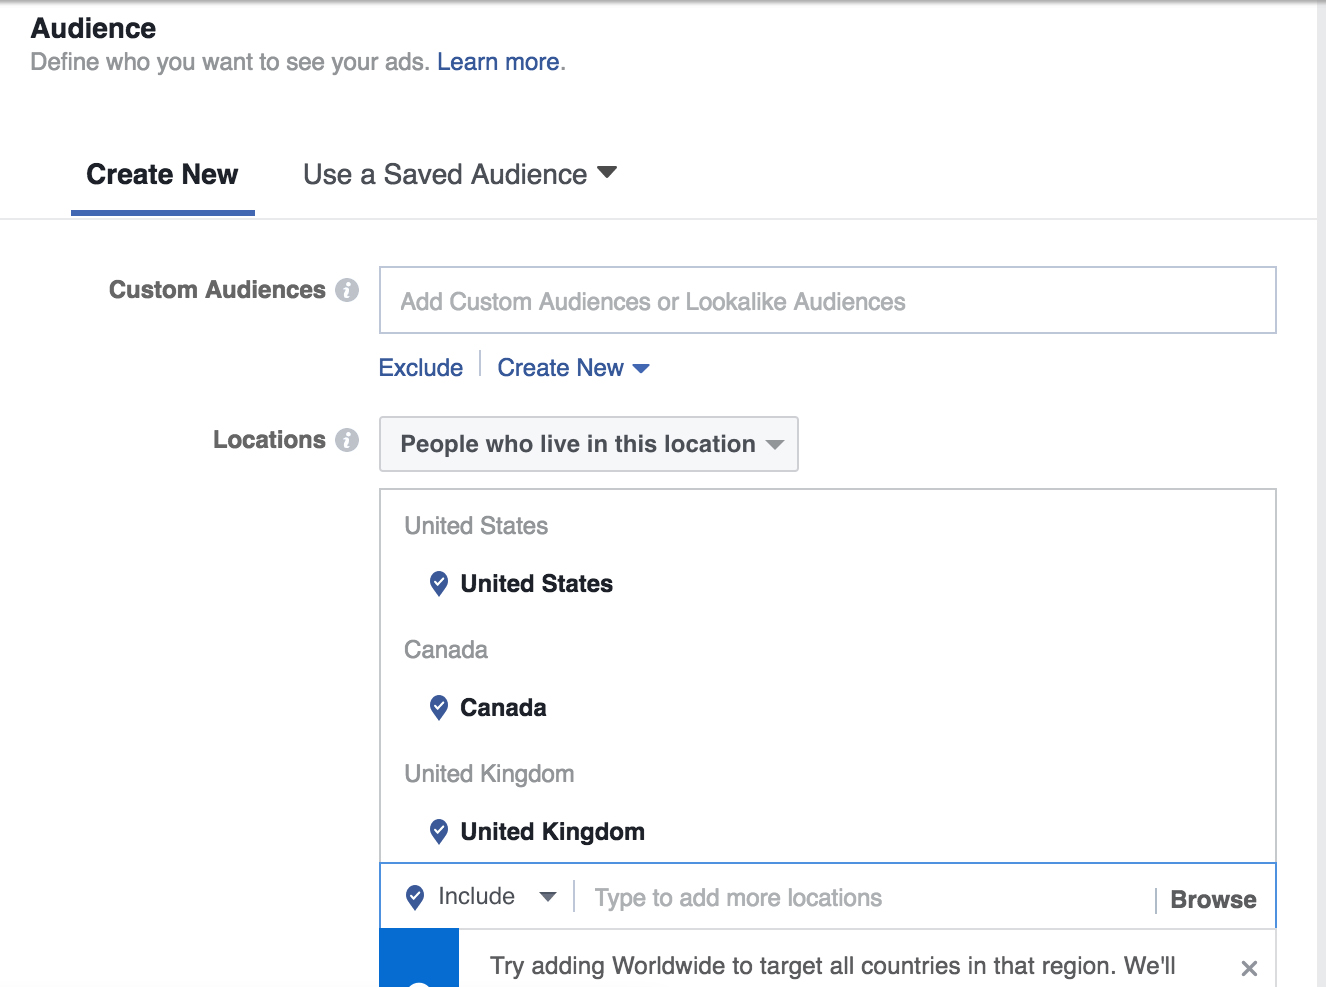 Keep scrolling down and fill in the detailed targeting section by typing keywords you know your potential audience is looking for. Again, Facebook will give useful suggestions to make this work even easier. 